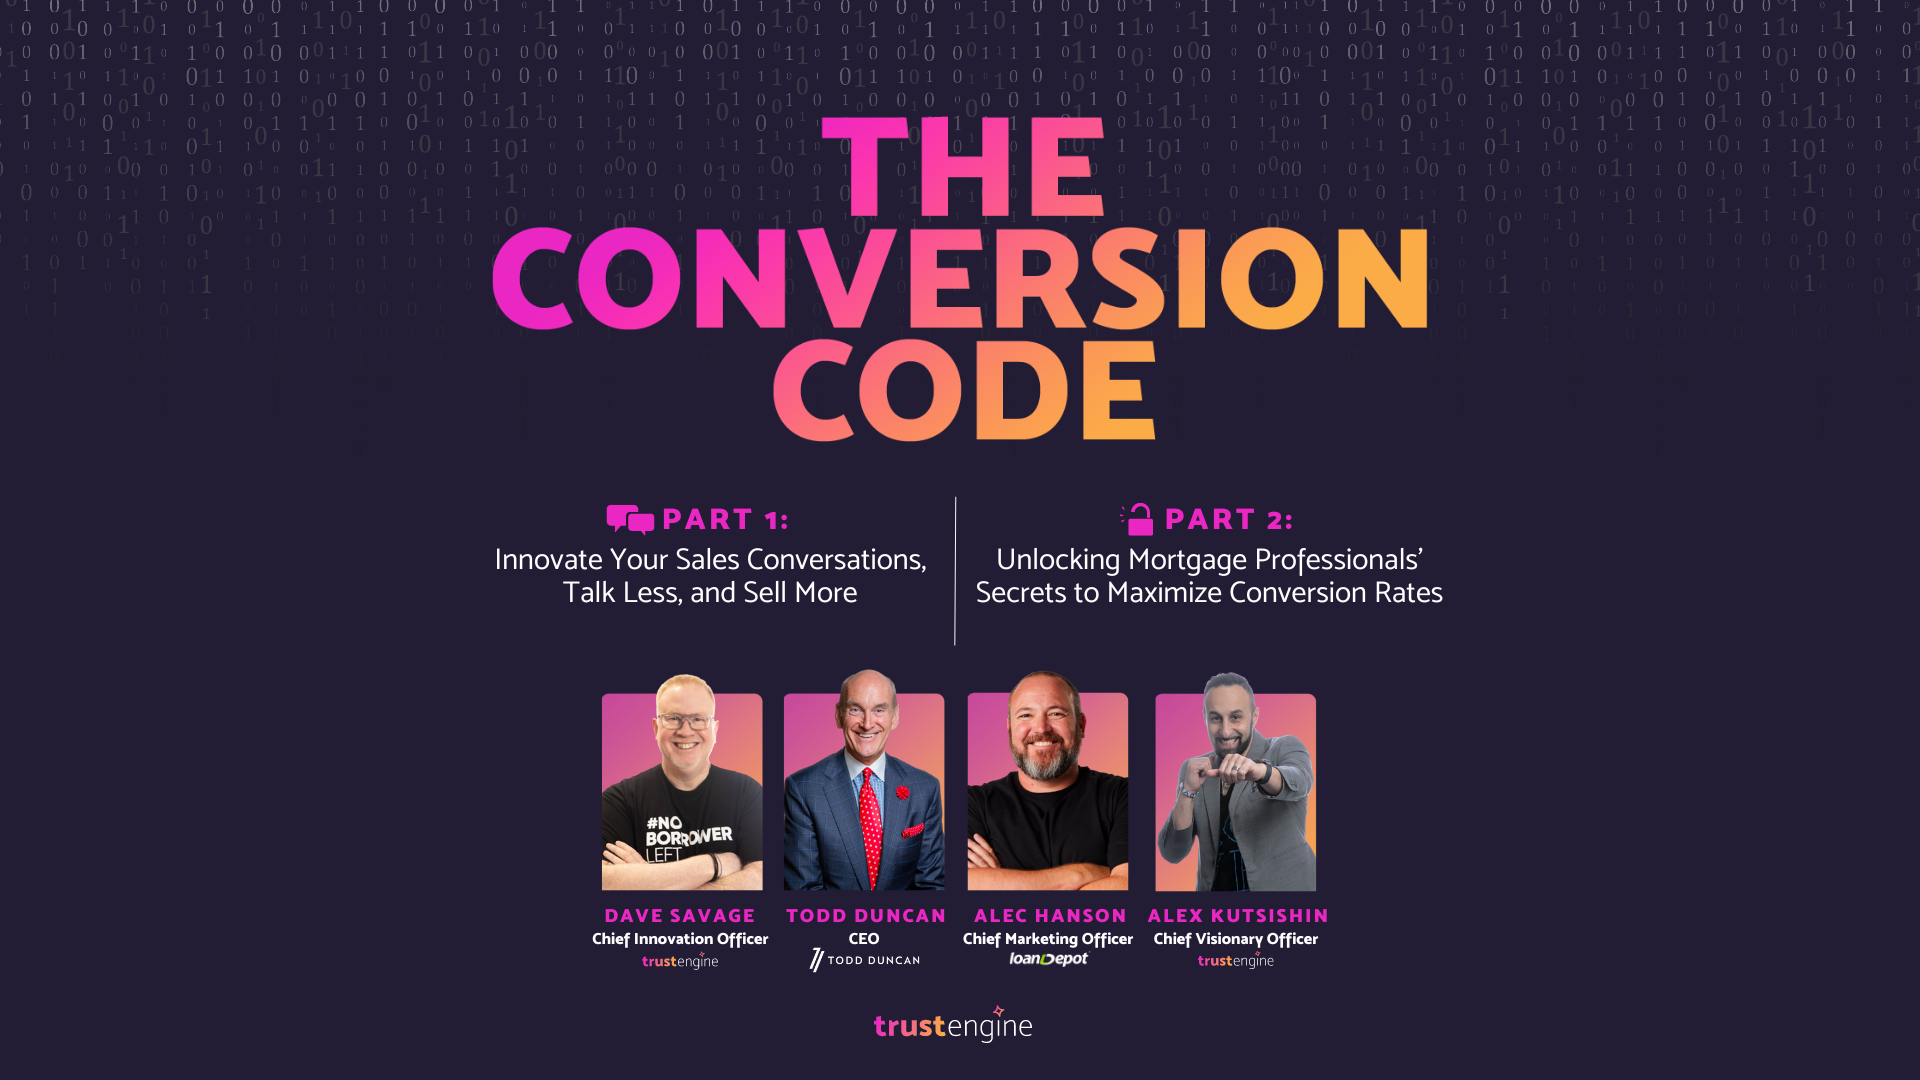 The Conversion Code Part 1: Innovate Your Sales Conversations, Talk Less, and Sell More